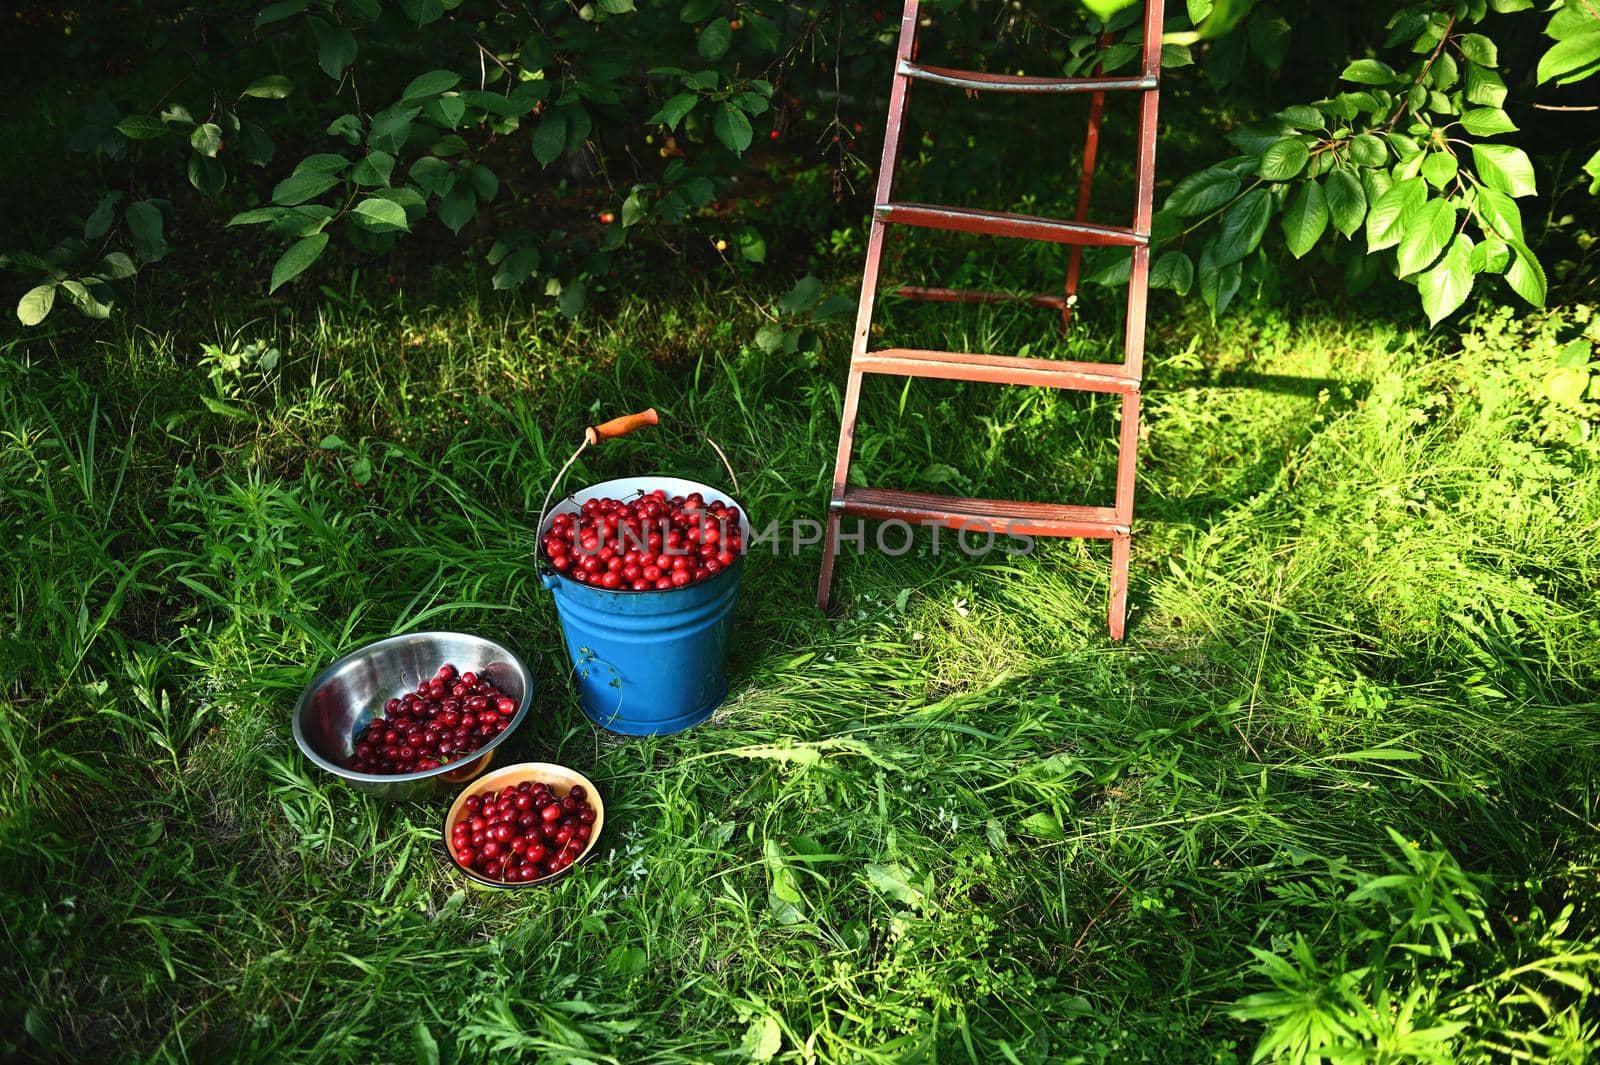 Harvesting cherries. Bucket and bowls of freshly picked cherries on the background of old ladder on green grass in orchard by artgf